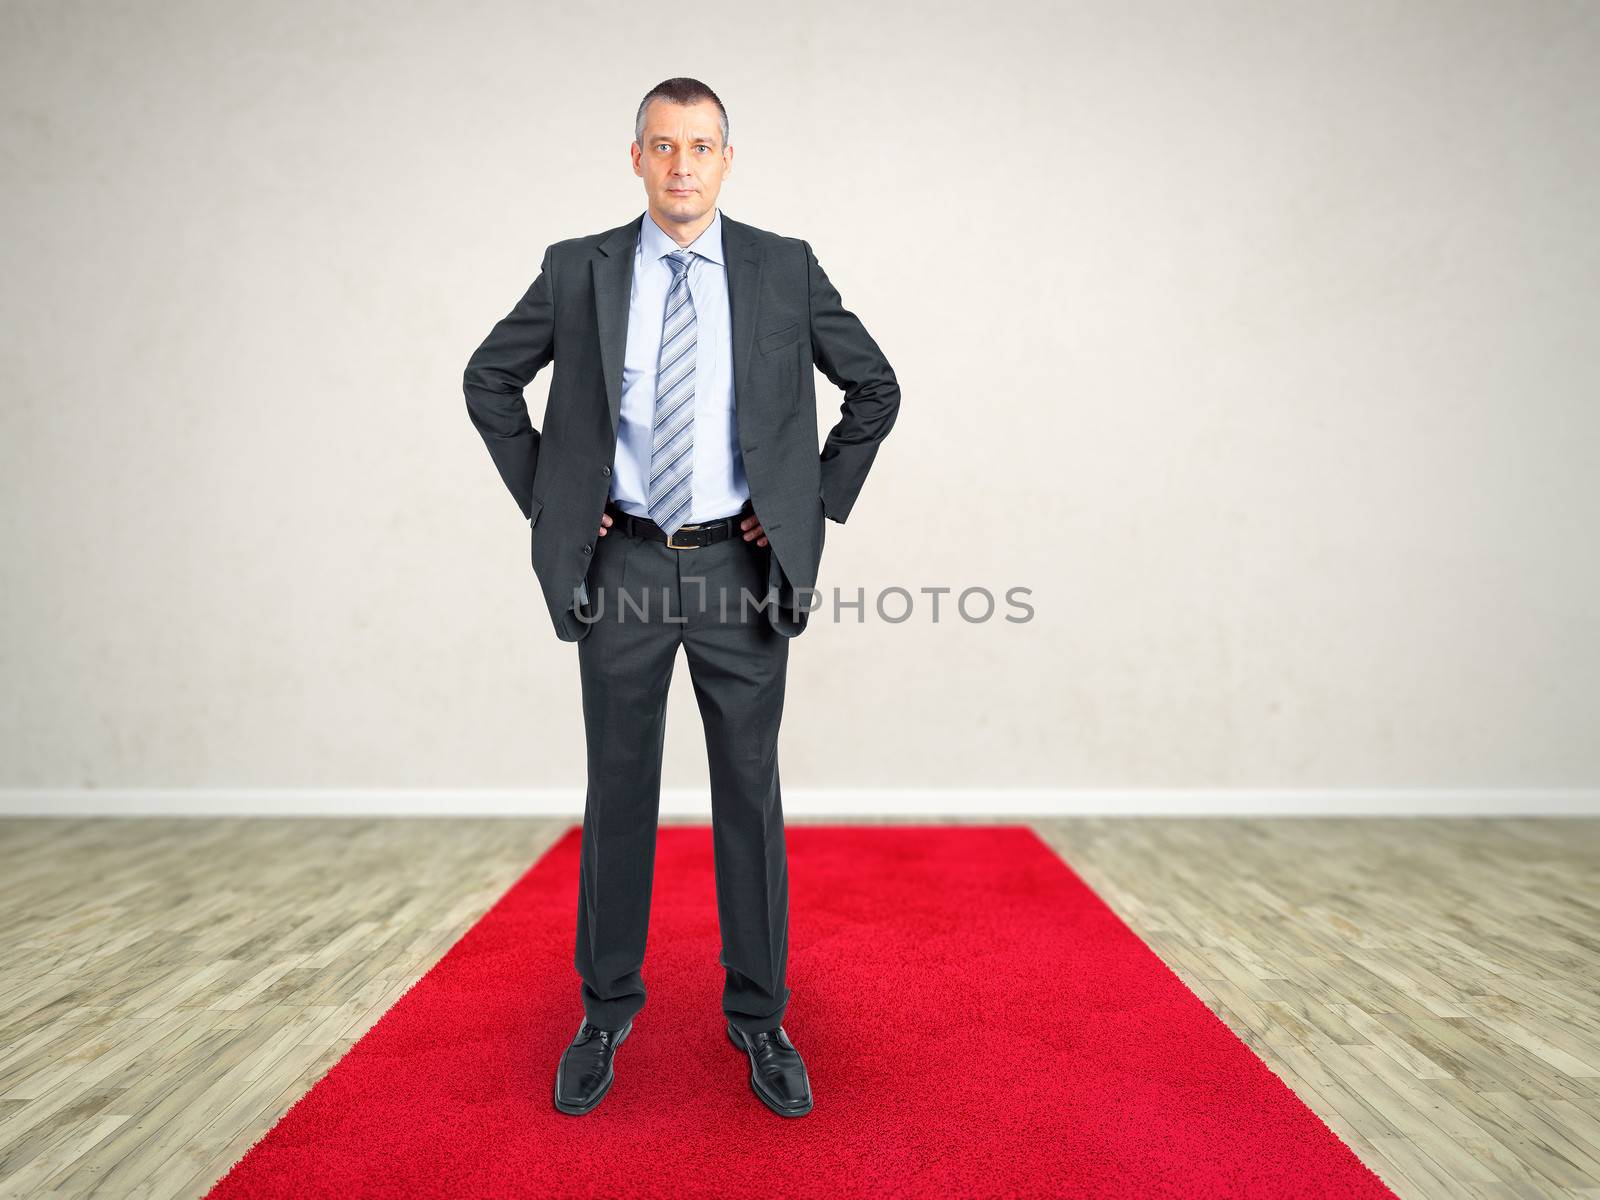 A room with a red carpet and a business man